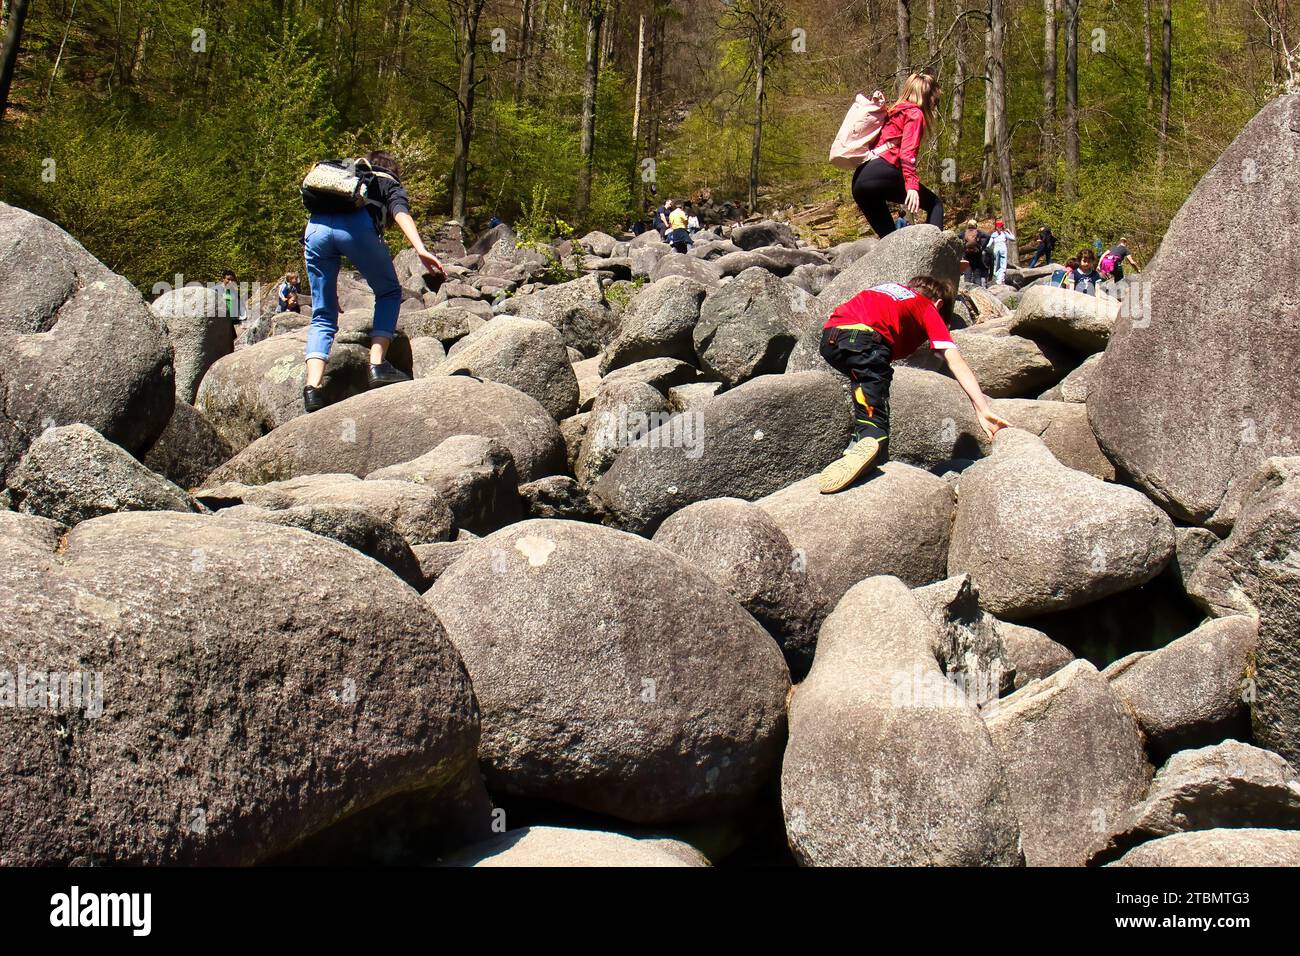 Lautertal, Germany - April 24, 2021: Large rocks on a hill at Felsenmeer, Sea of Rocks, on a spring day in Germany. Stock Photo